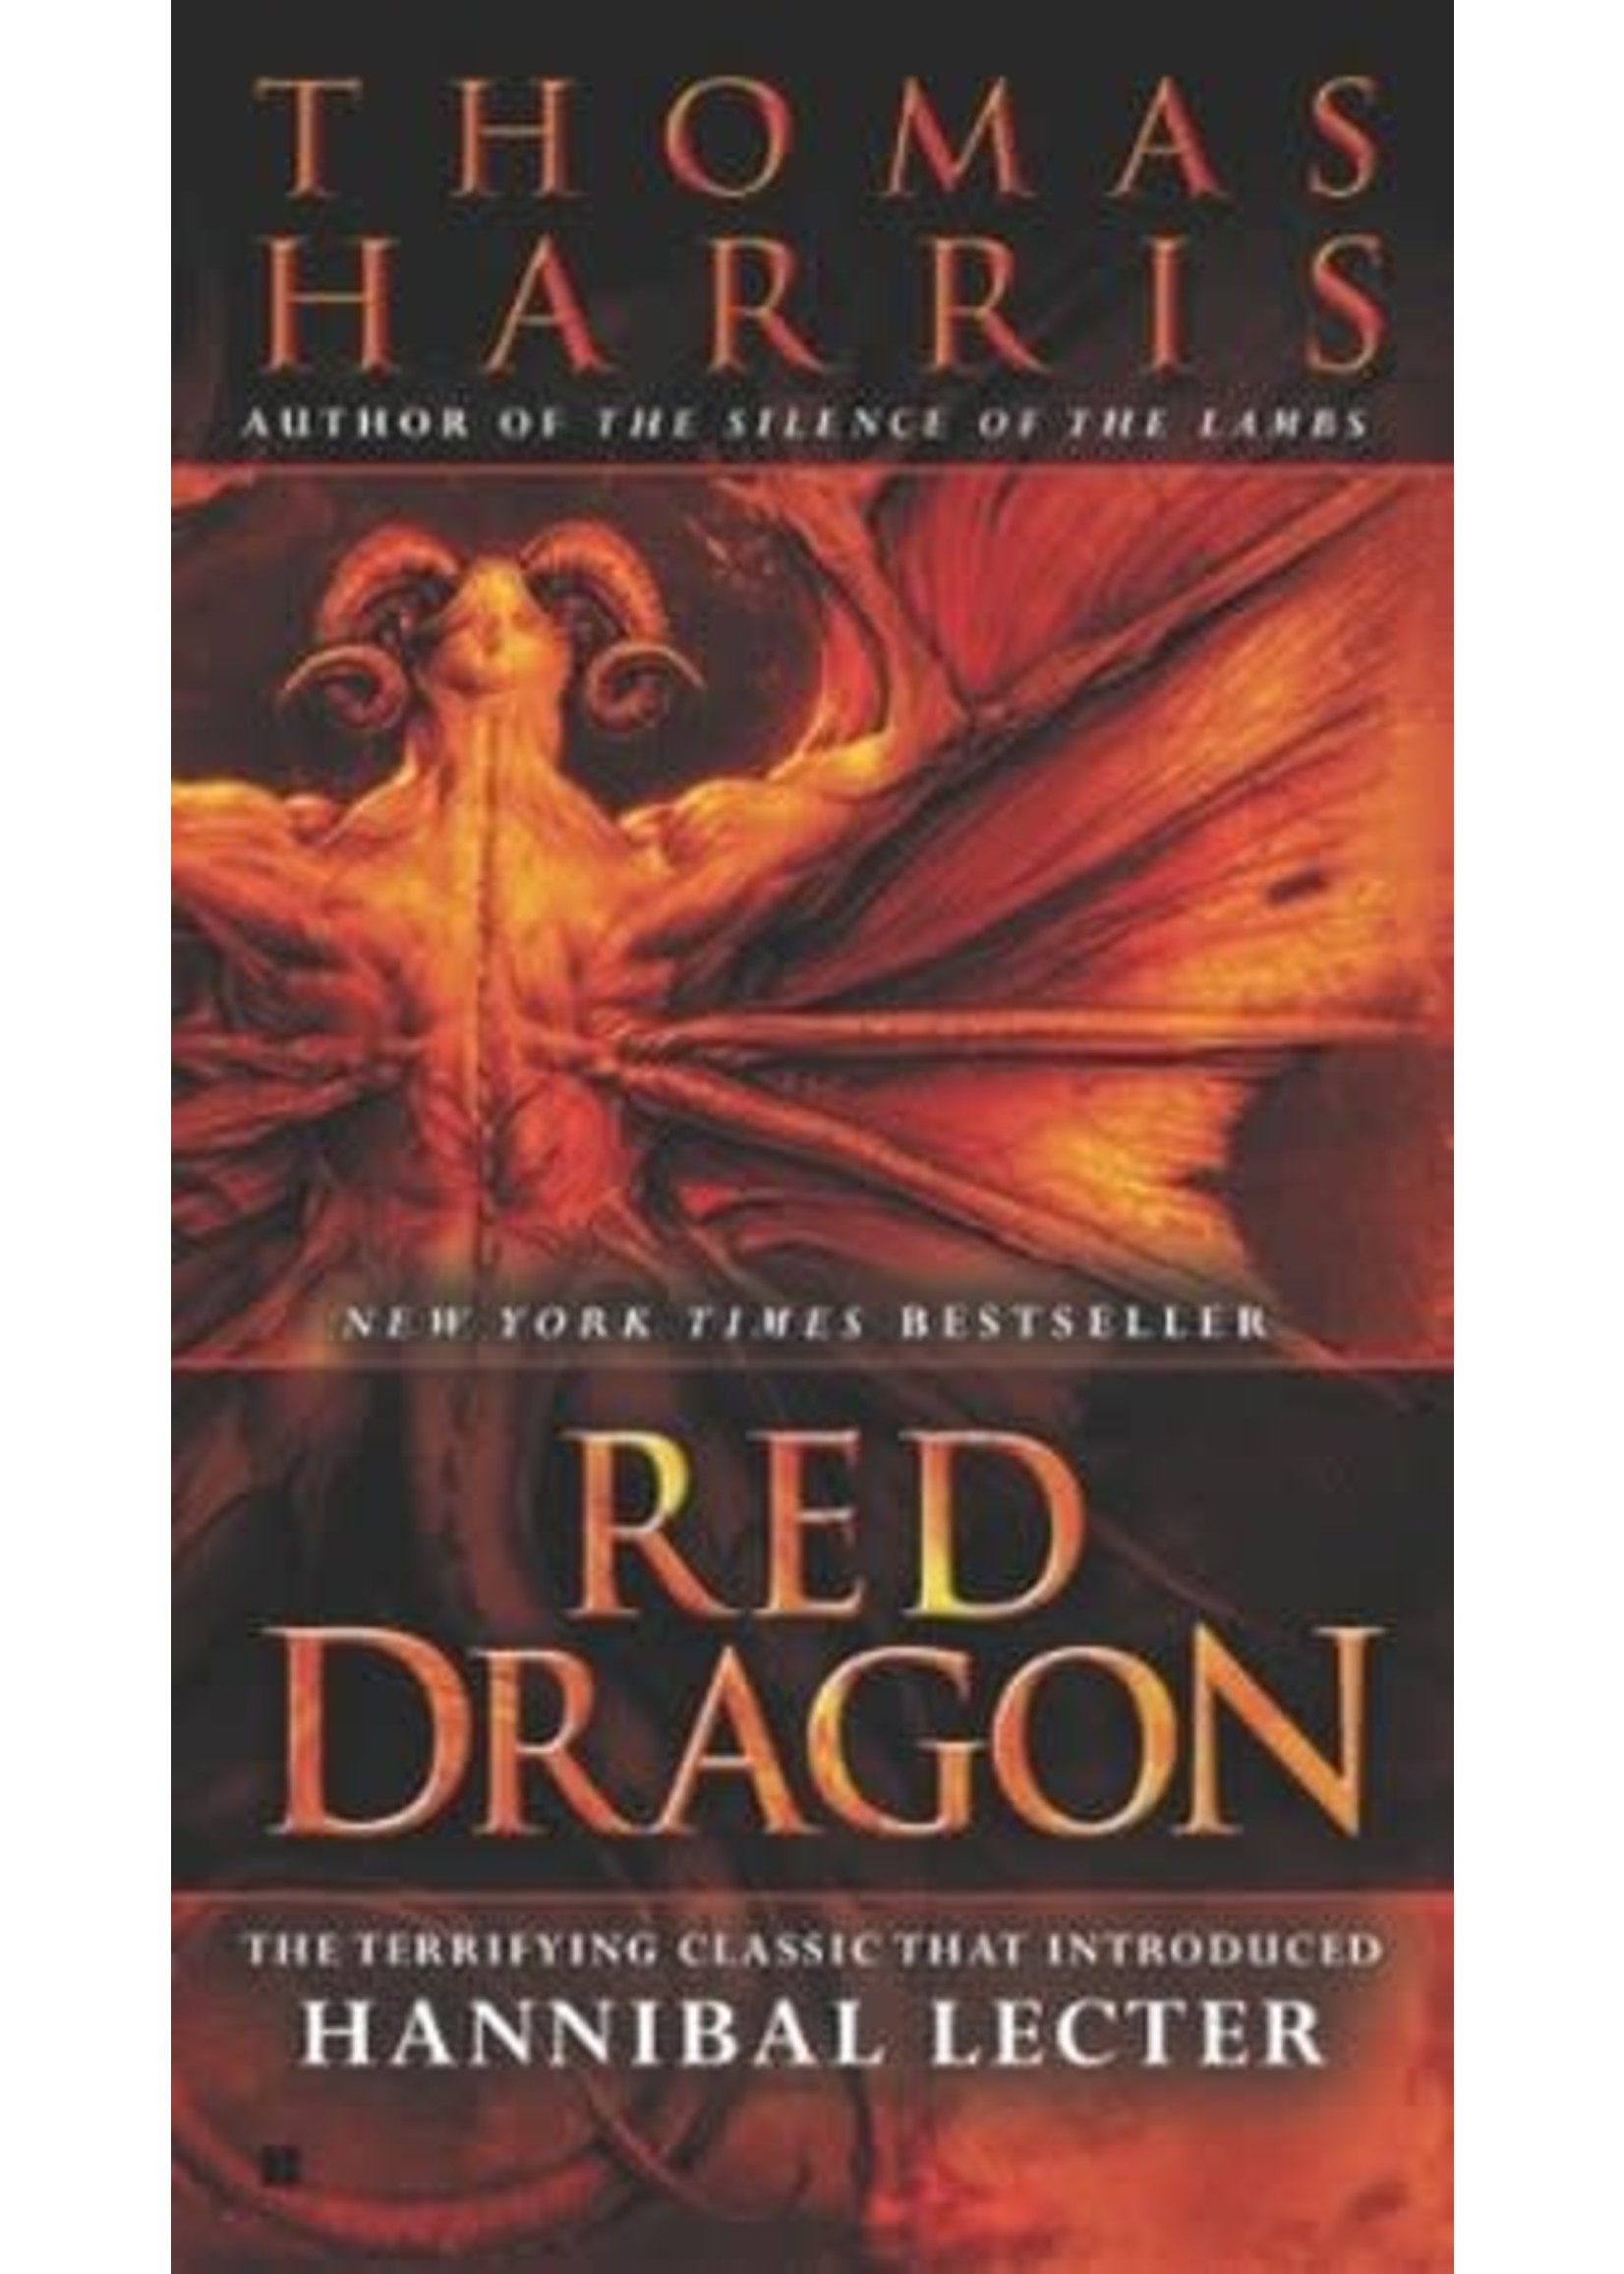 Red Dragon (Hannibal Lecter #1) by Thomas Harris